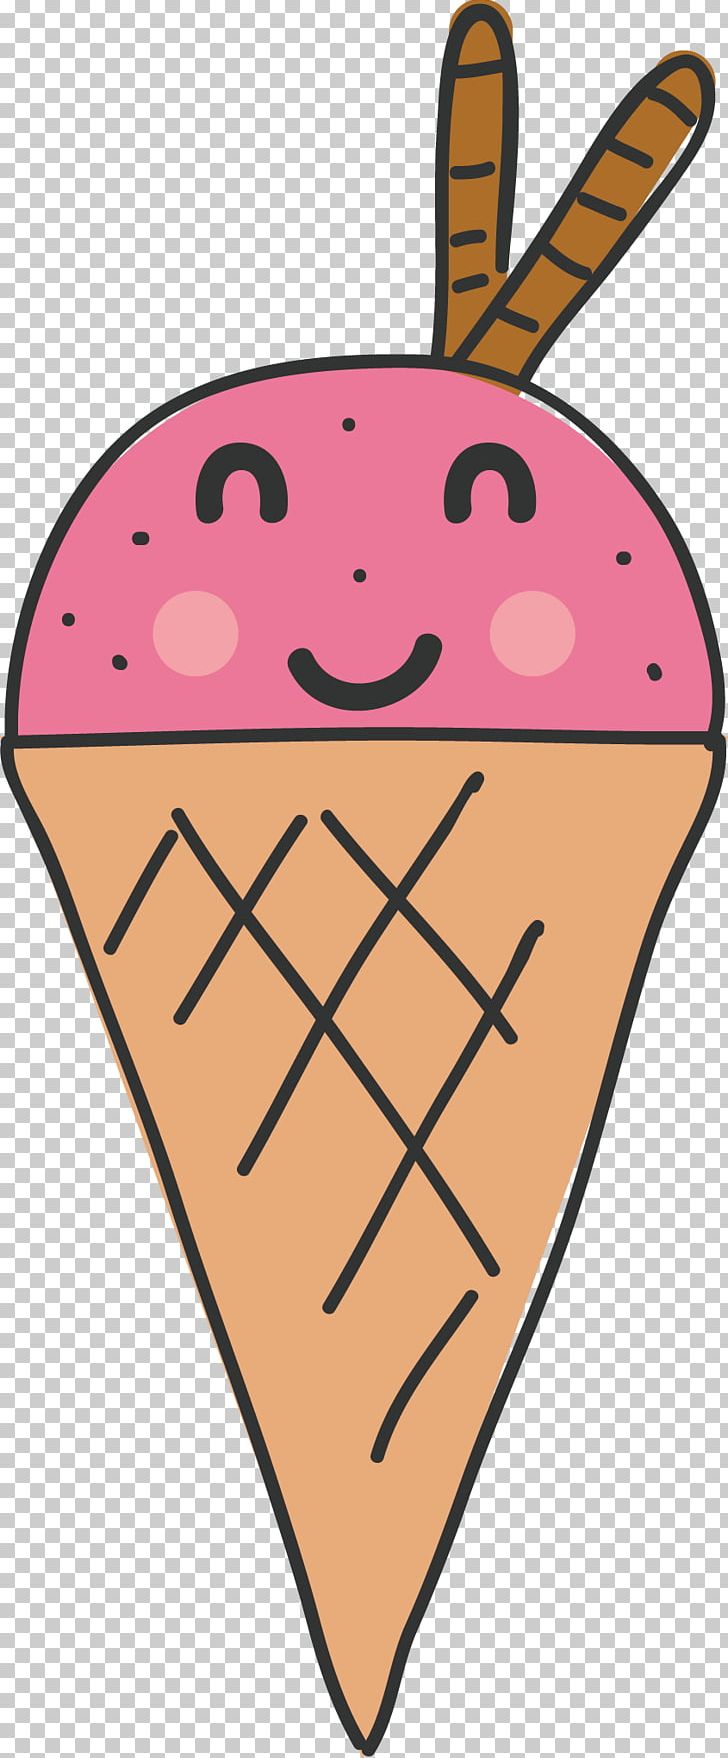 Strawberry Ice Cream PNG, Clipart, Chocolate Vector, Colorful, Comics, Cream, Cream Vector Free PNG Download